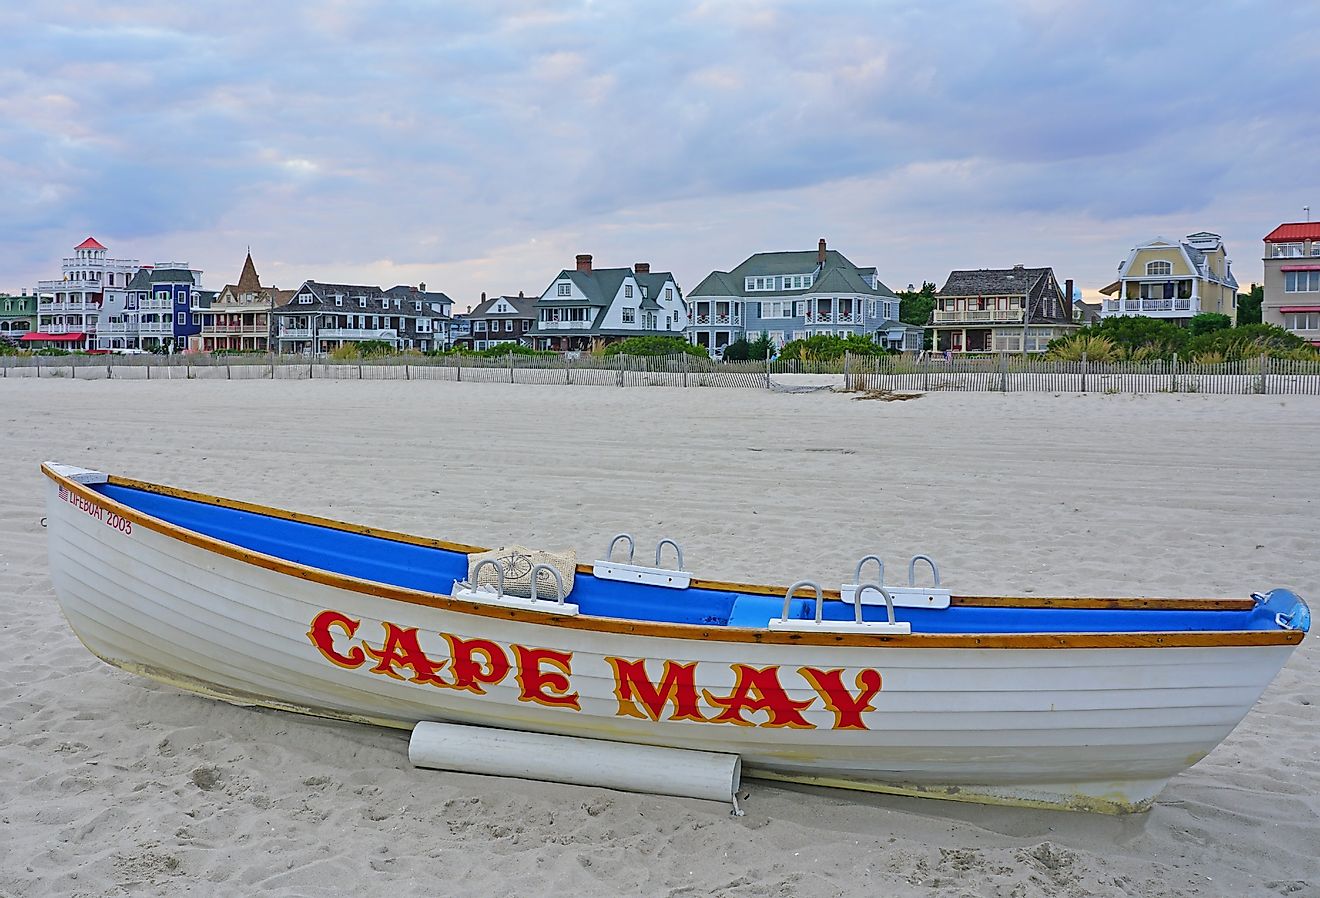 View of a boat with a Cape May sign on the beach in Cape May, New Jersey. Image credit EQRoy via Shutterstock